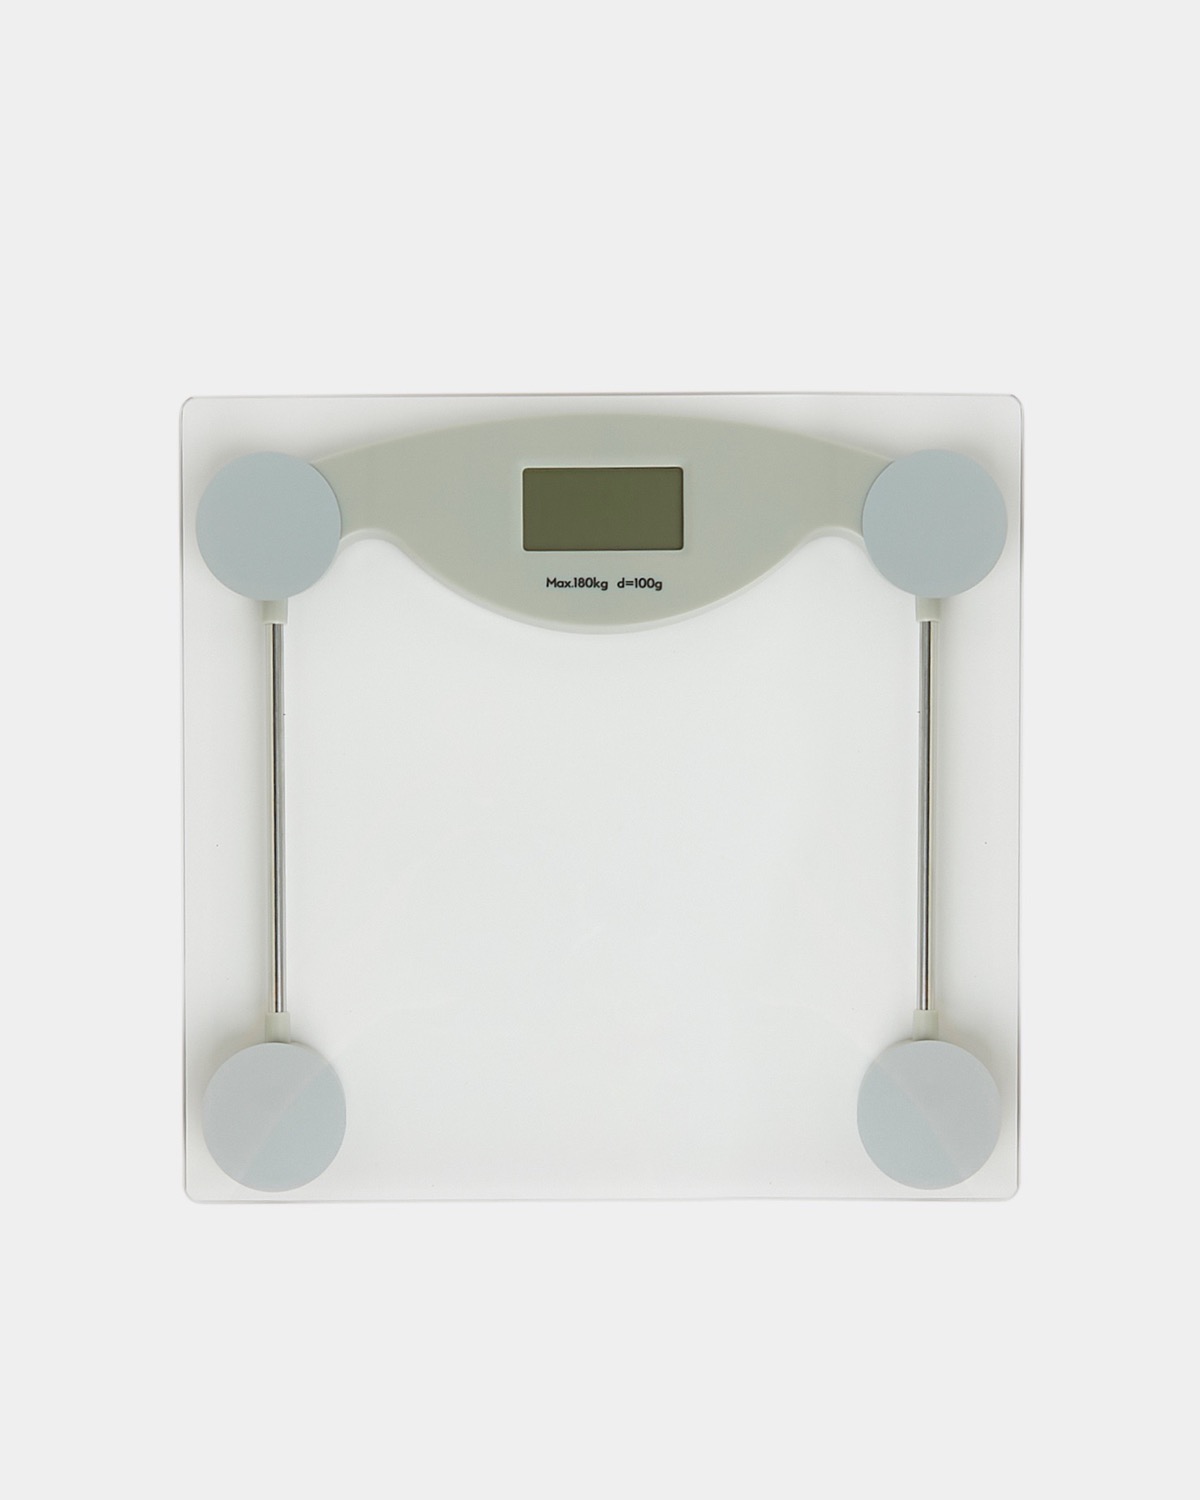 White Home Electronic Bathroom Scales